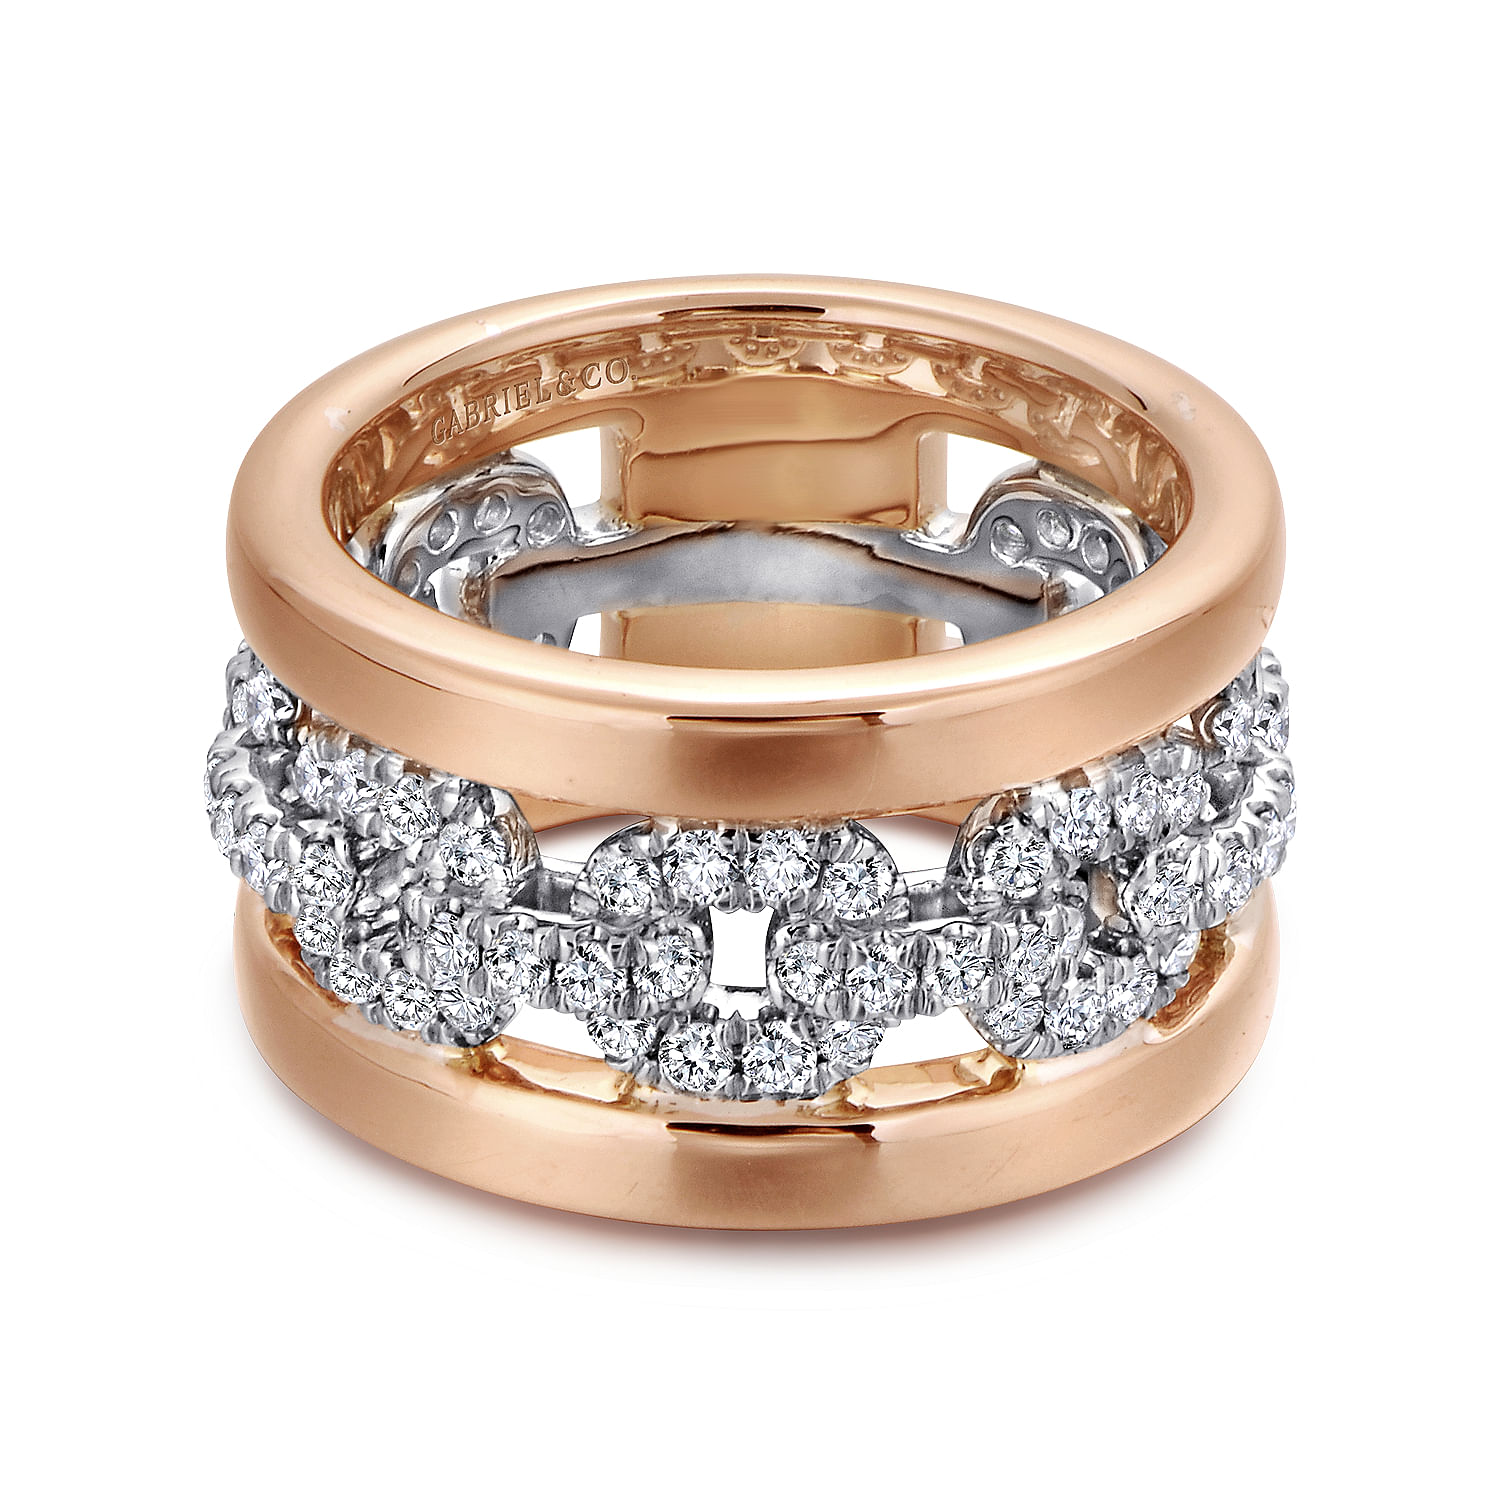 Gabriel - Wide 14K White and Rose Gold Fancy Diamond Anniversary Band